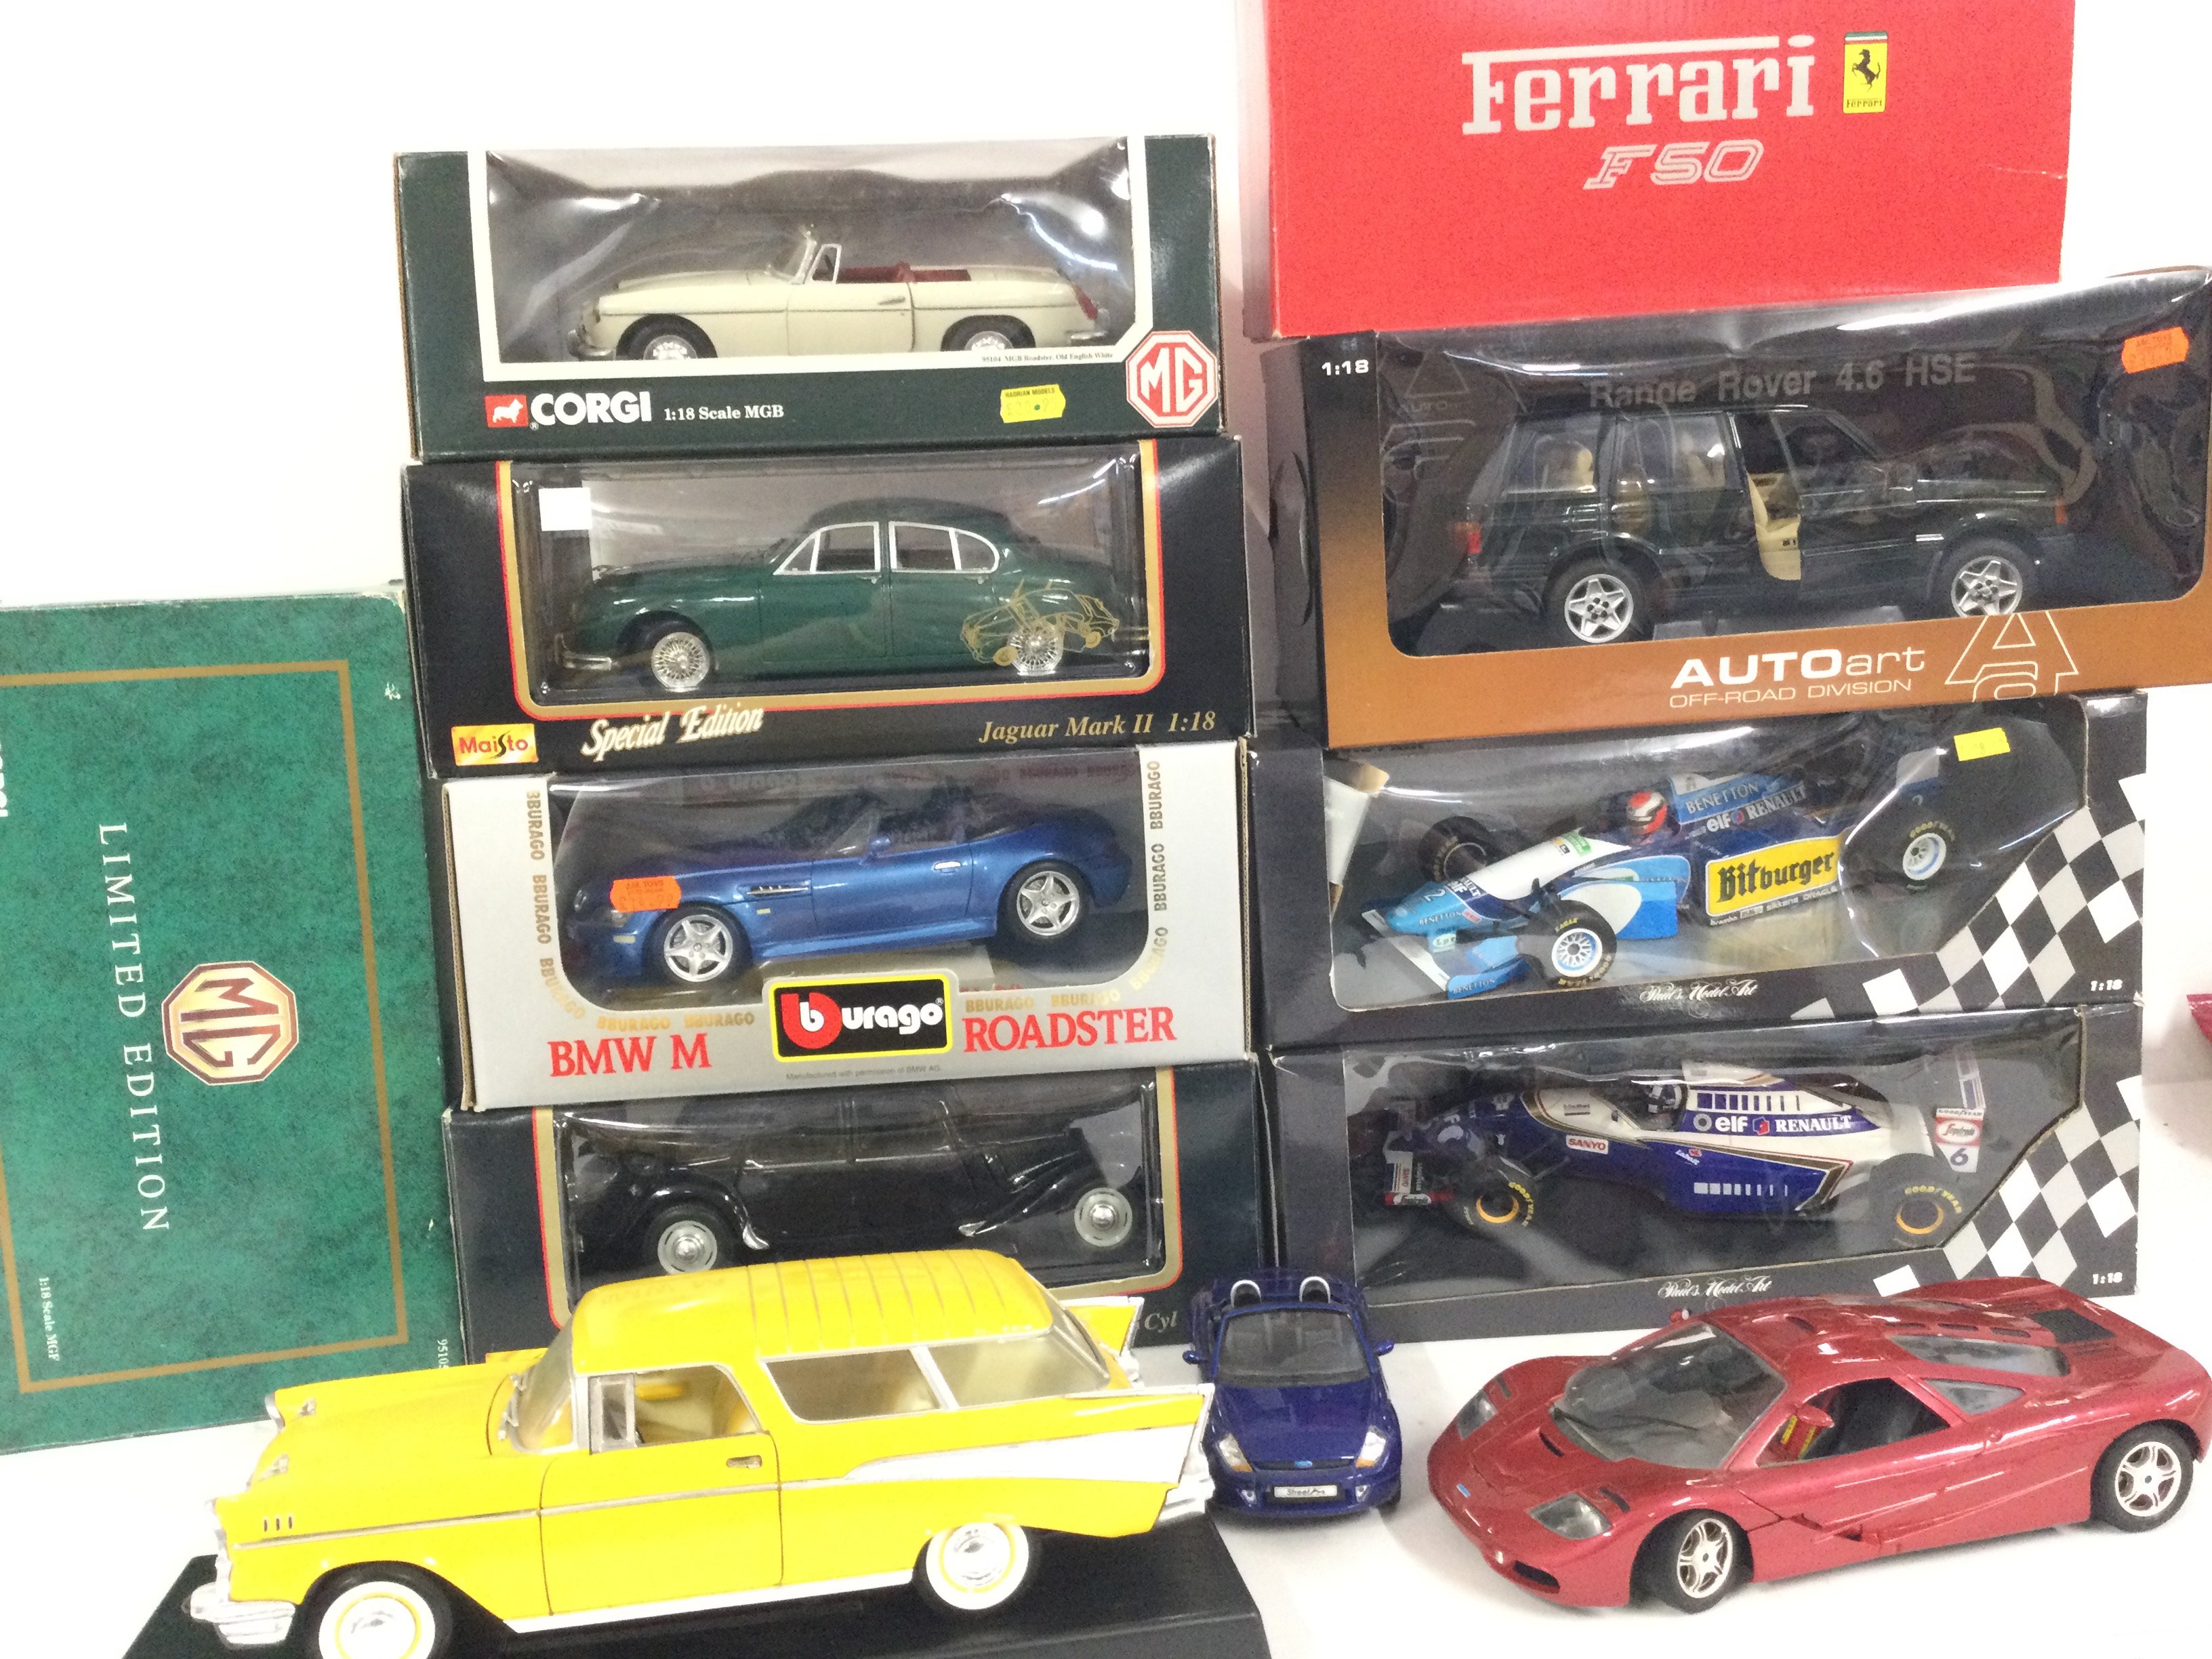 A Collection of Boxed Diecast Vehicles including Burago. Maisto Corgi. All 1:18 Scale.